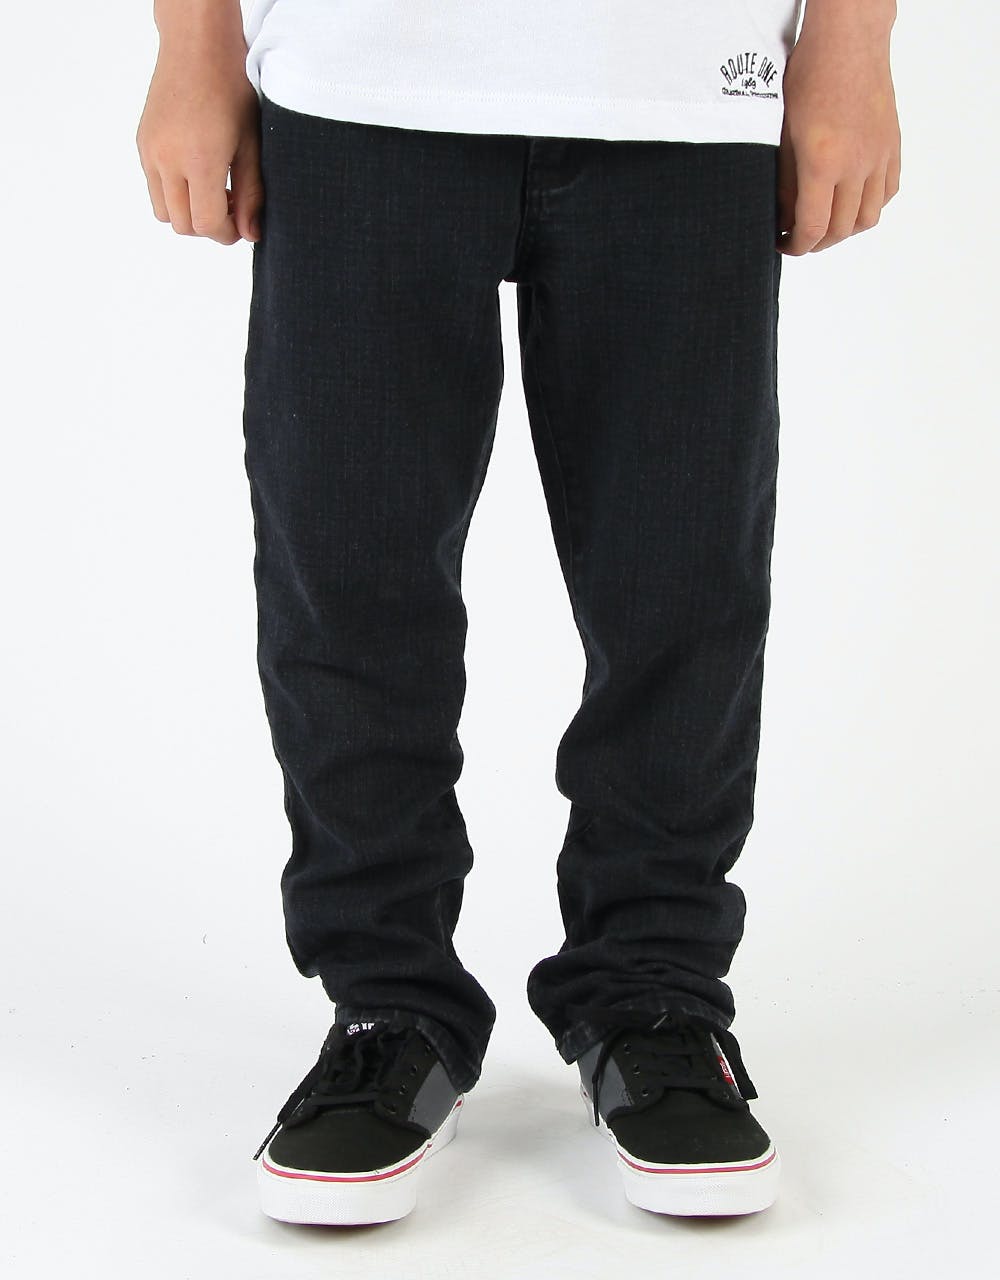 Route One Straight Fit Kids Jeans - Black